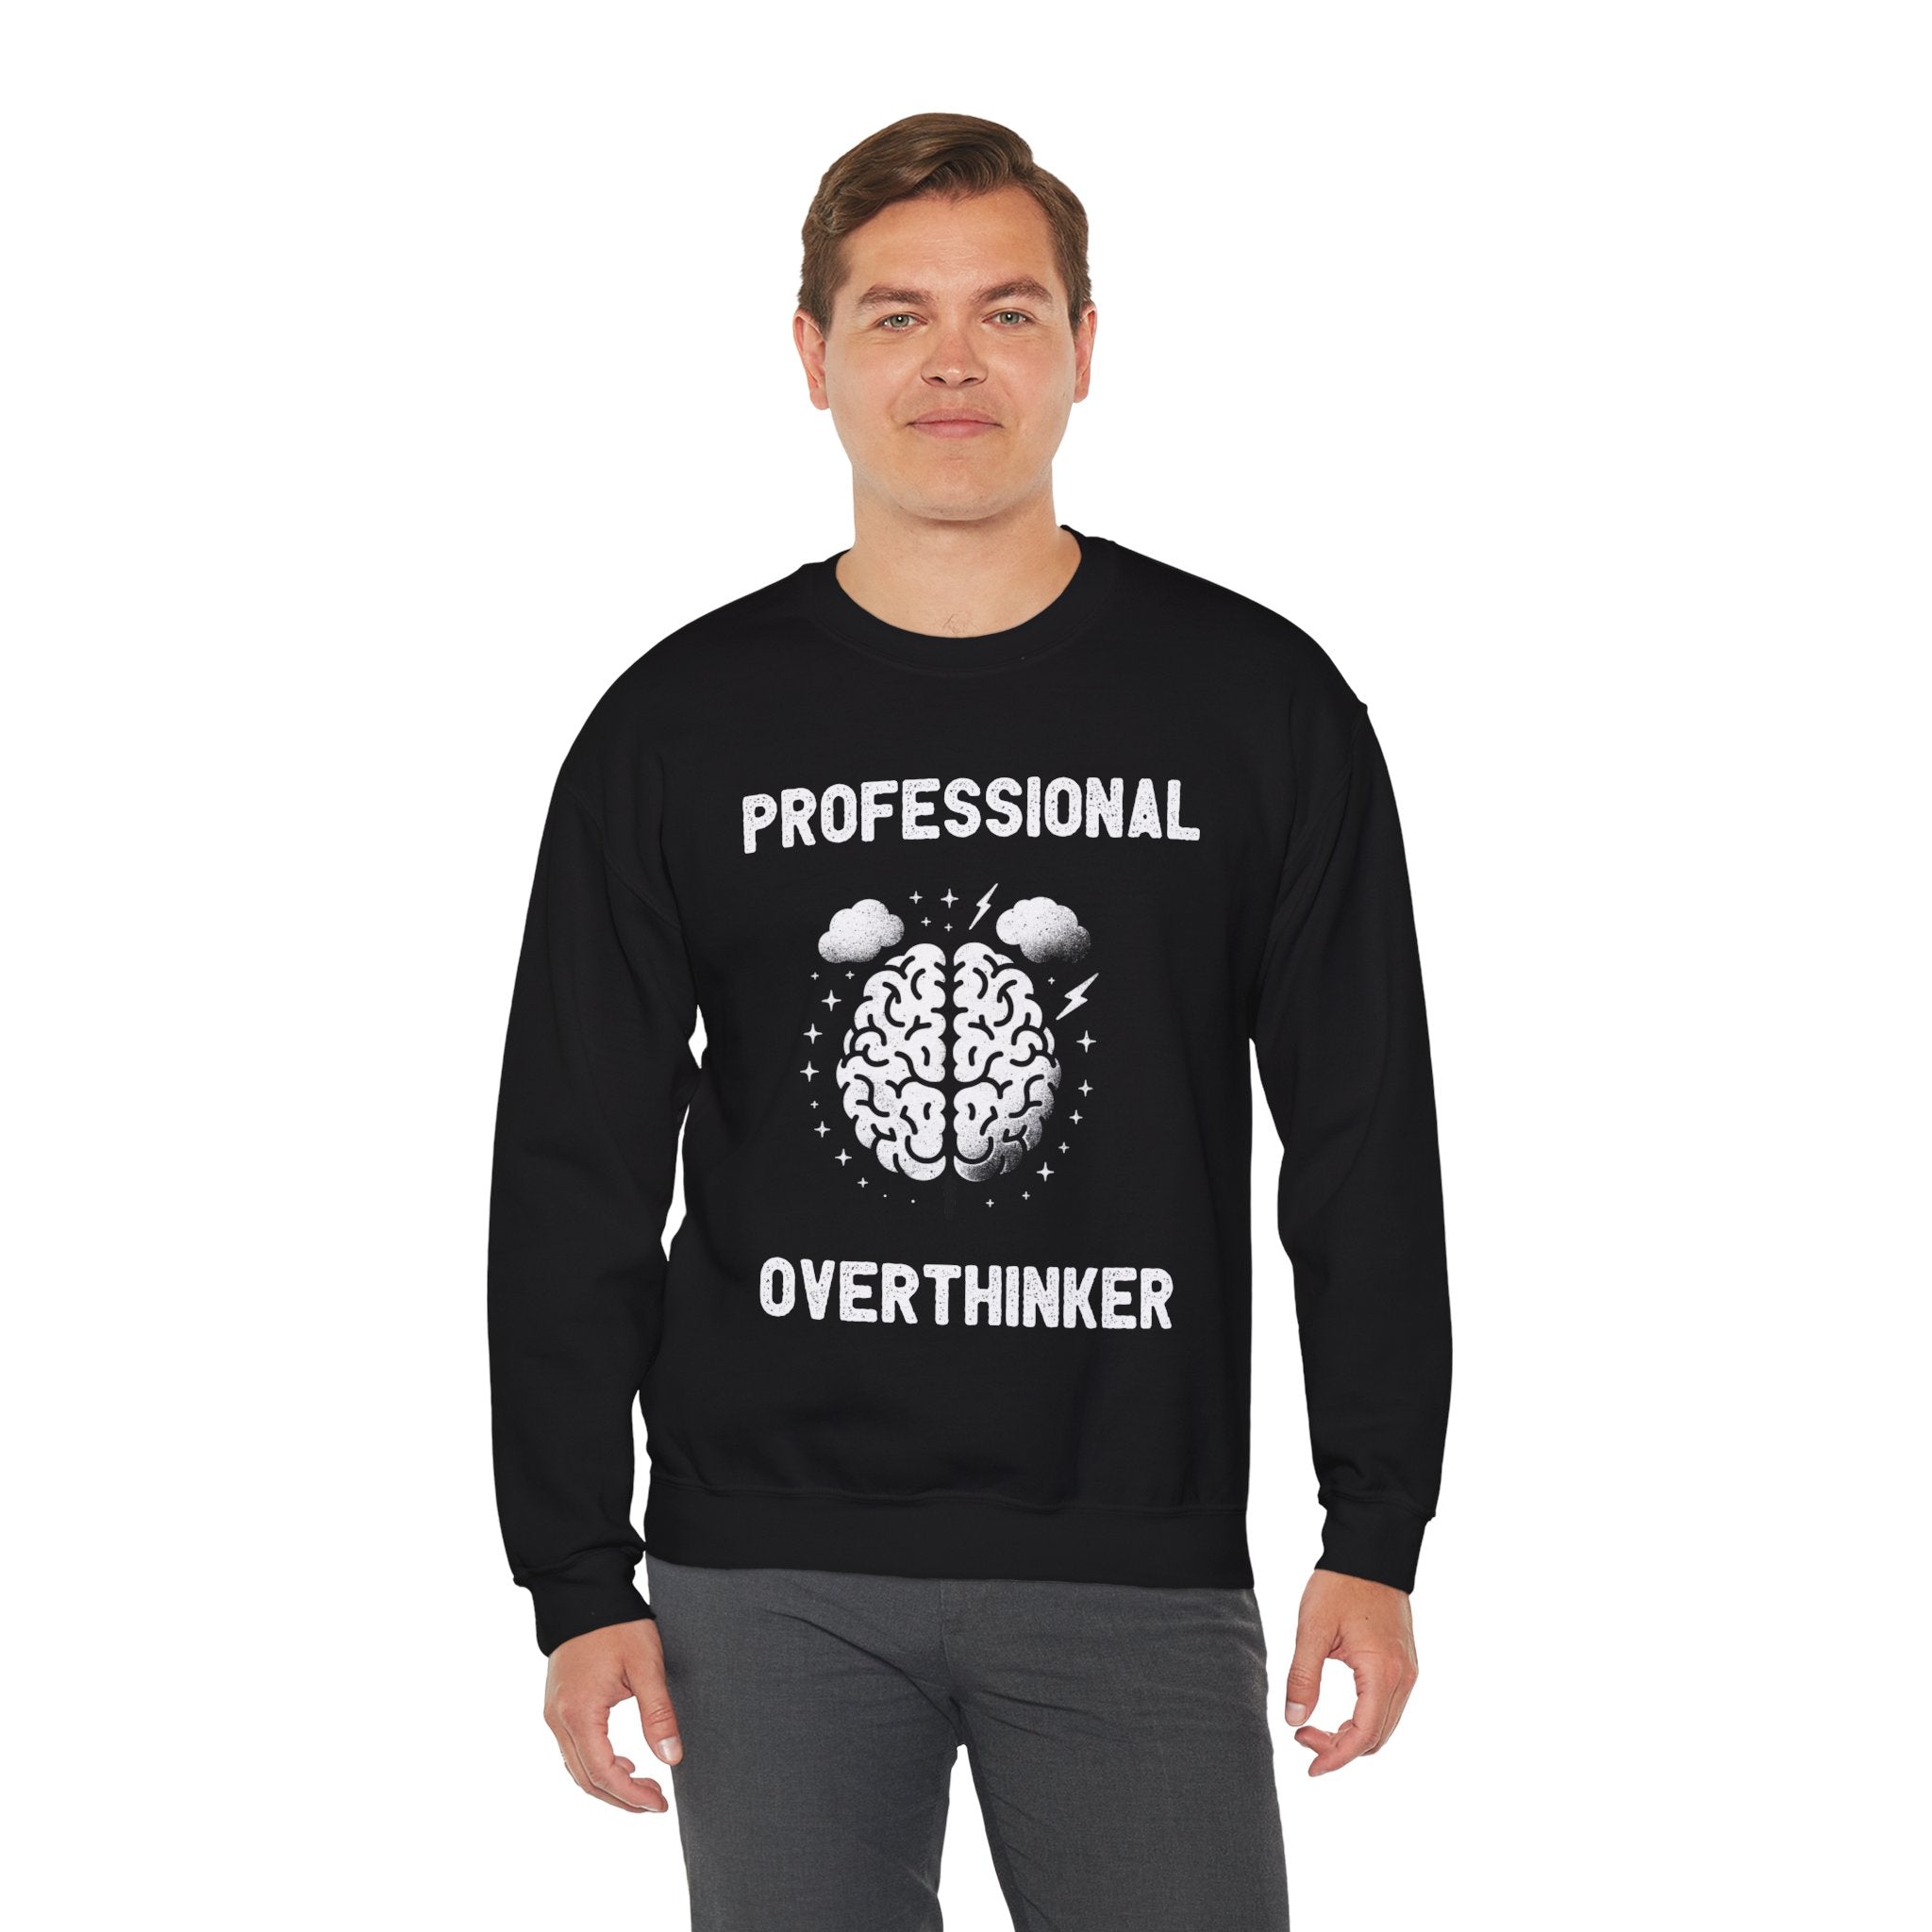 A person wearing a cozy Professional Overthinker - Sweatshirt with the text "PROFESSIONAL OVERTHINKER" and an illustration of a brain with storm clouds, offering warmth for colder months.